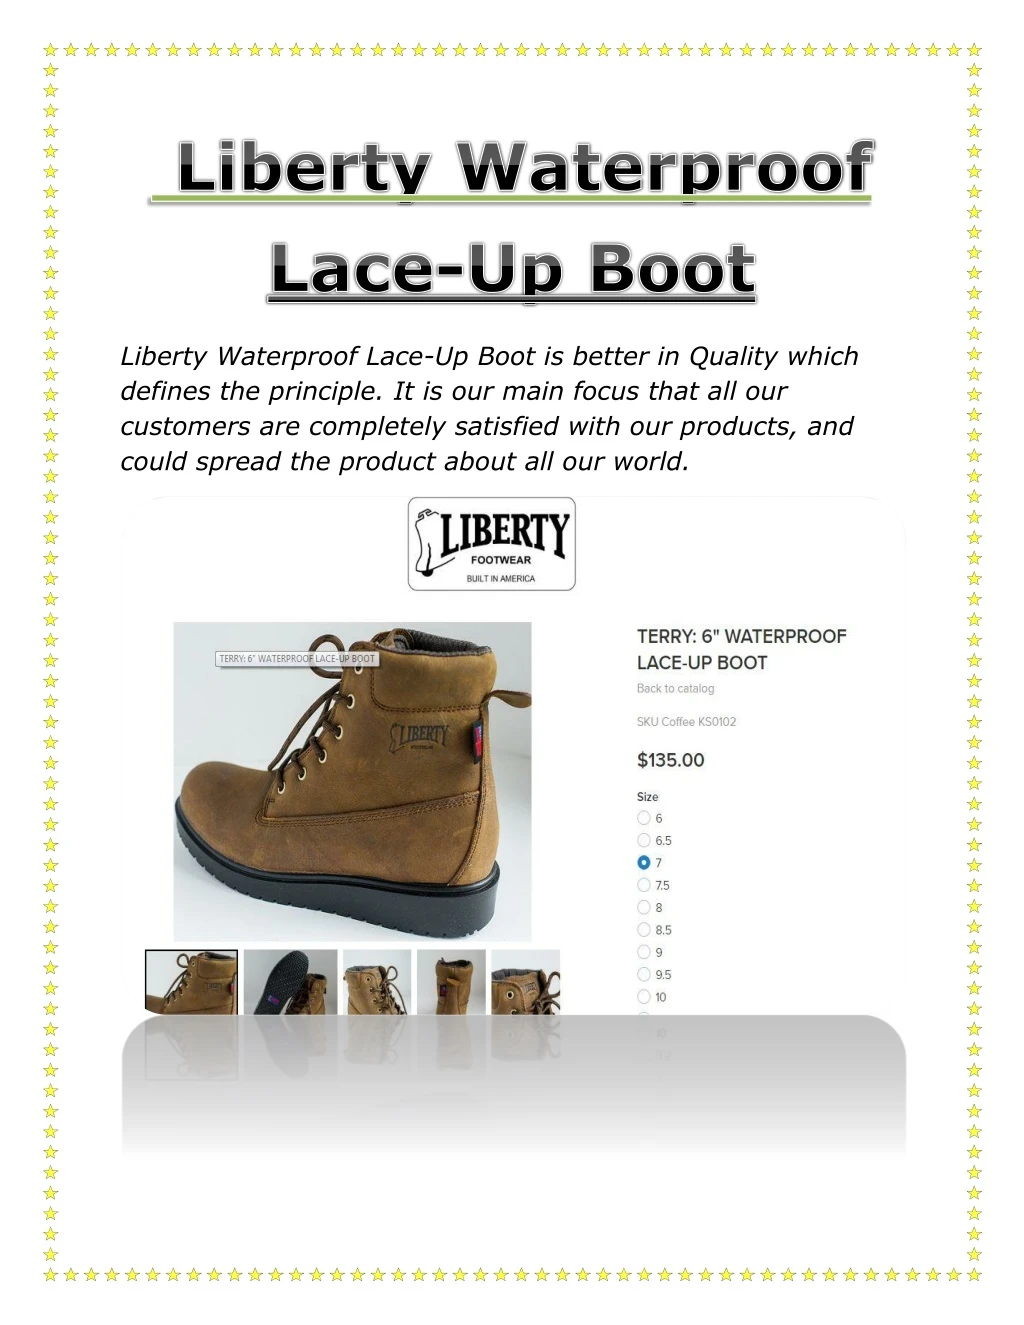 liberty waterproof lace up boot is better